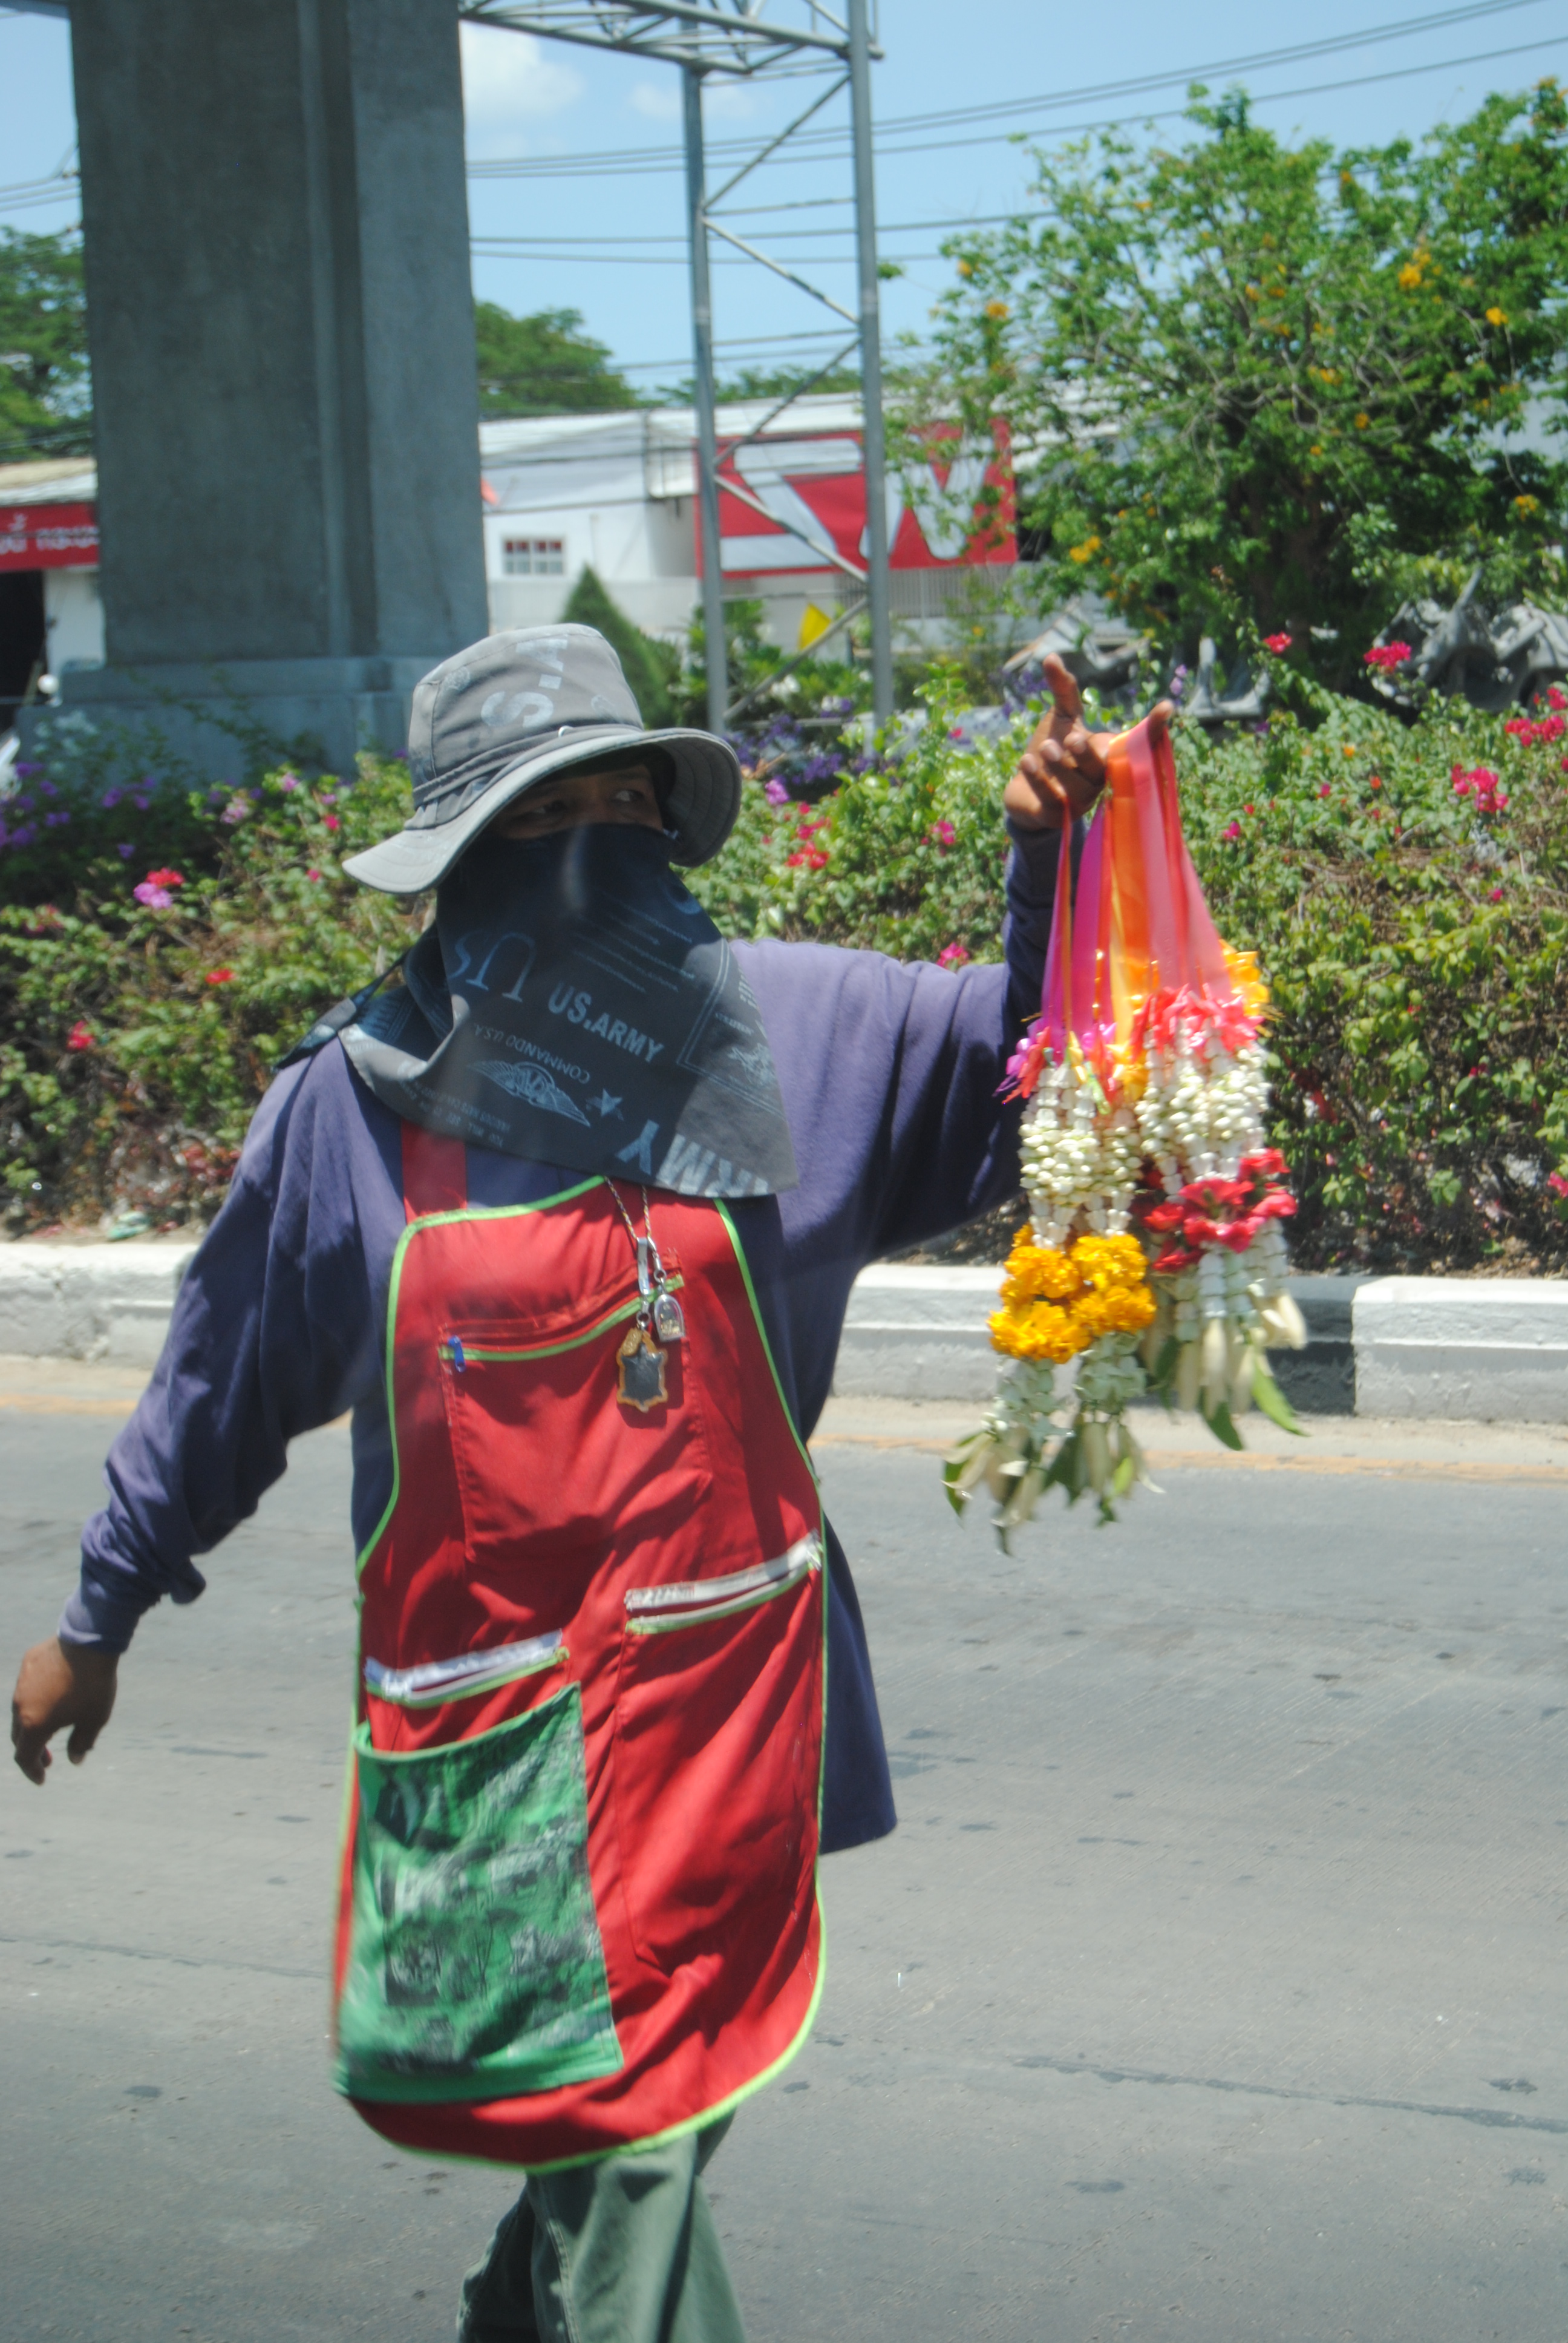 Woman Selling Flowers On The Street